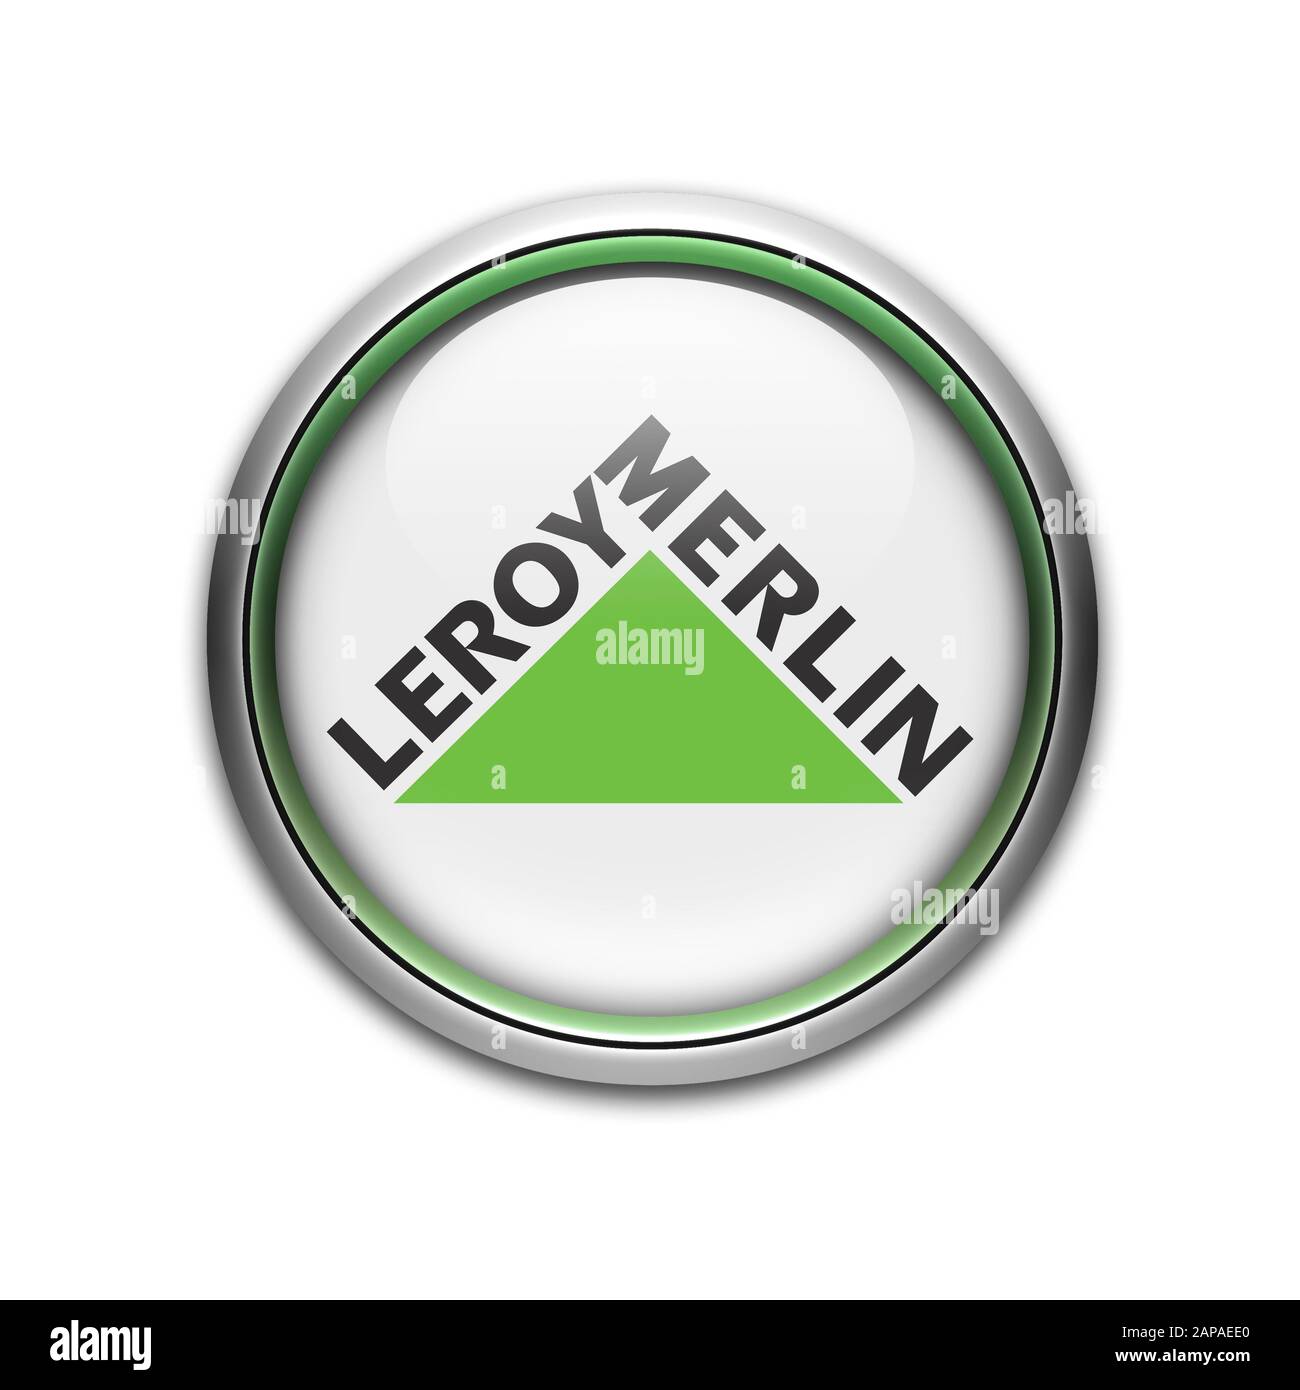 Leroy Merlin High Resolution Stock Photography and Images - Alamy